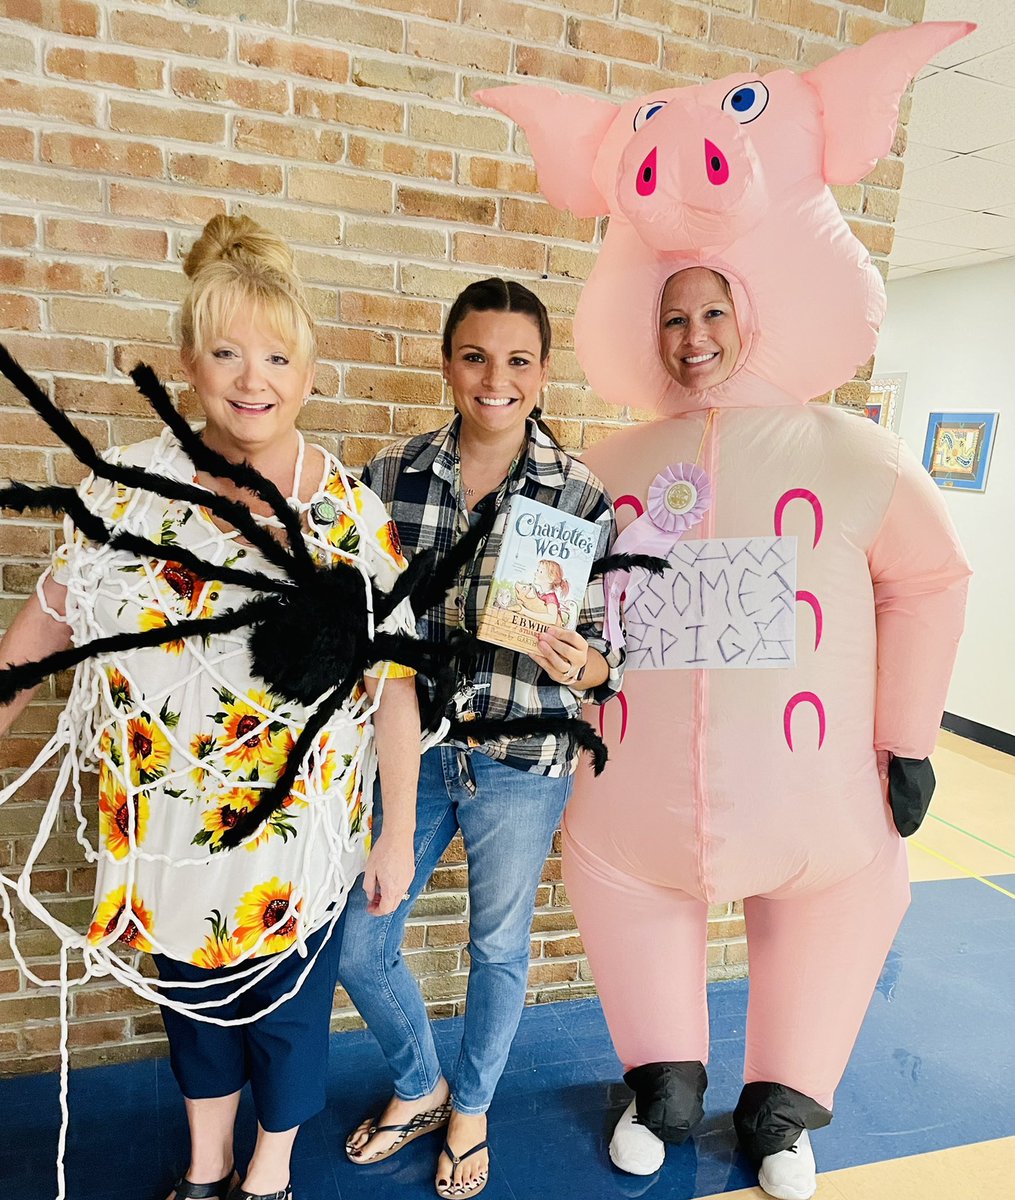 Book Character Dress Up Day at TBE 📚 Charolettes Web 🕷 🐖 👩‍🌾 @collierschools @Skudnig @LedbetterAlyssa